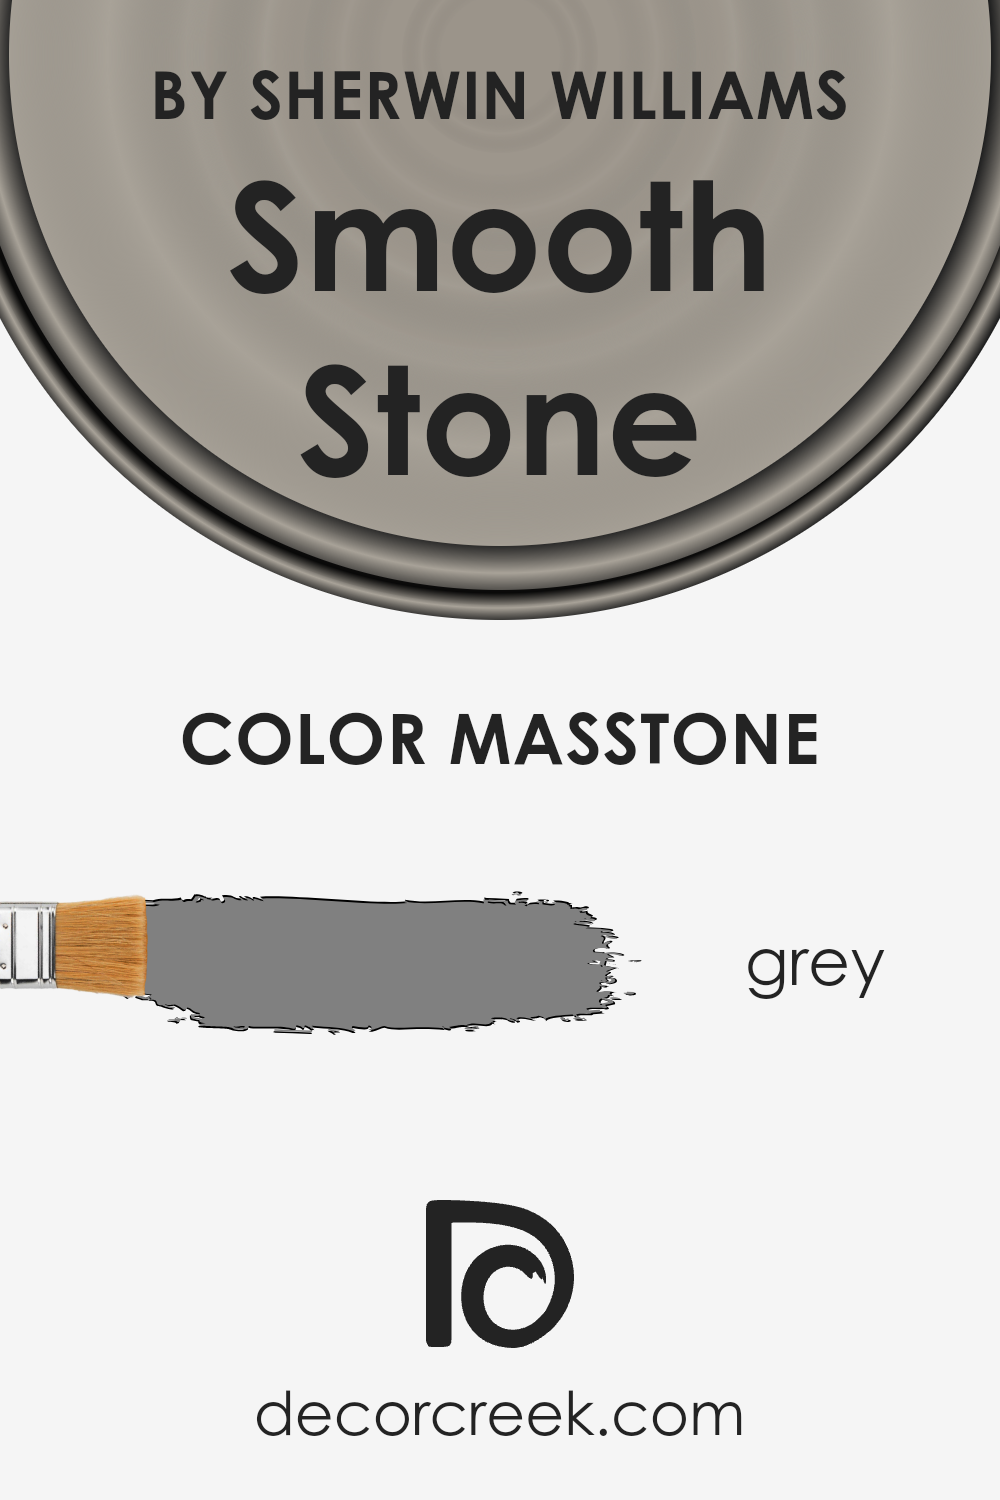 what_is_the_masstone_of_smooth_stone_sw_9568